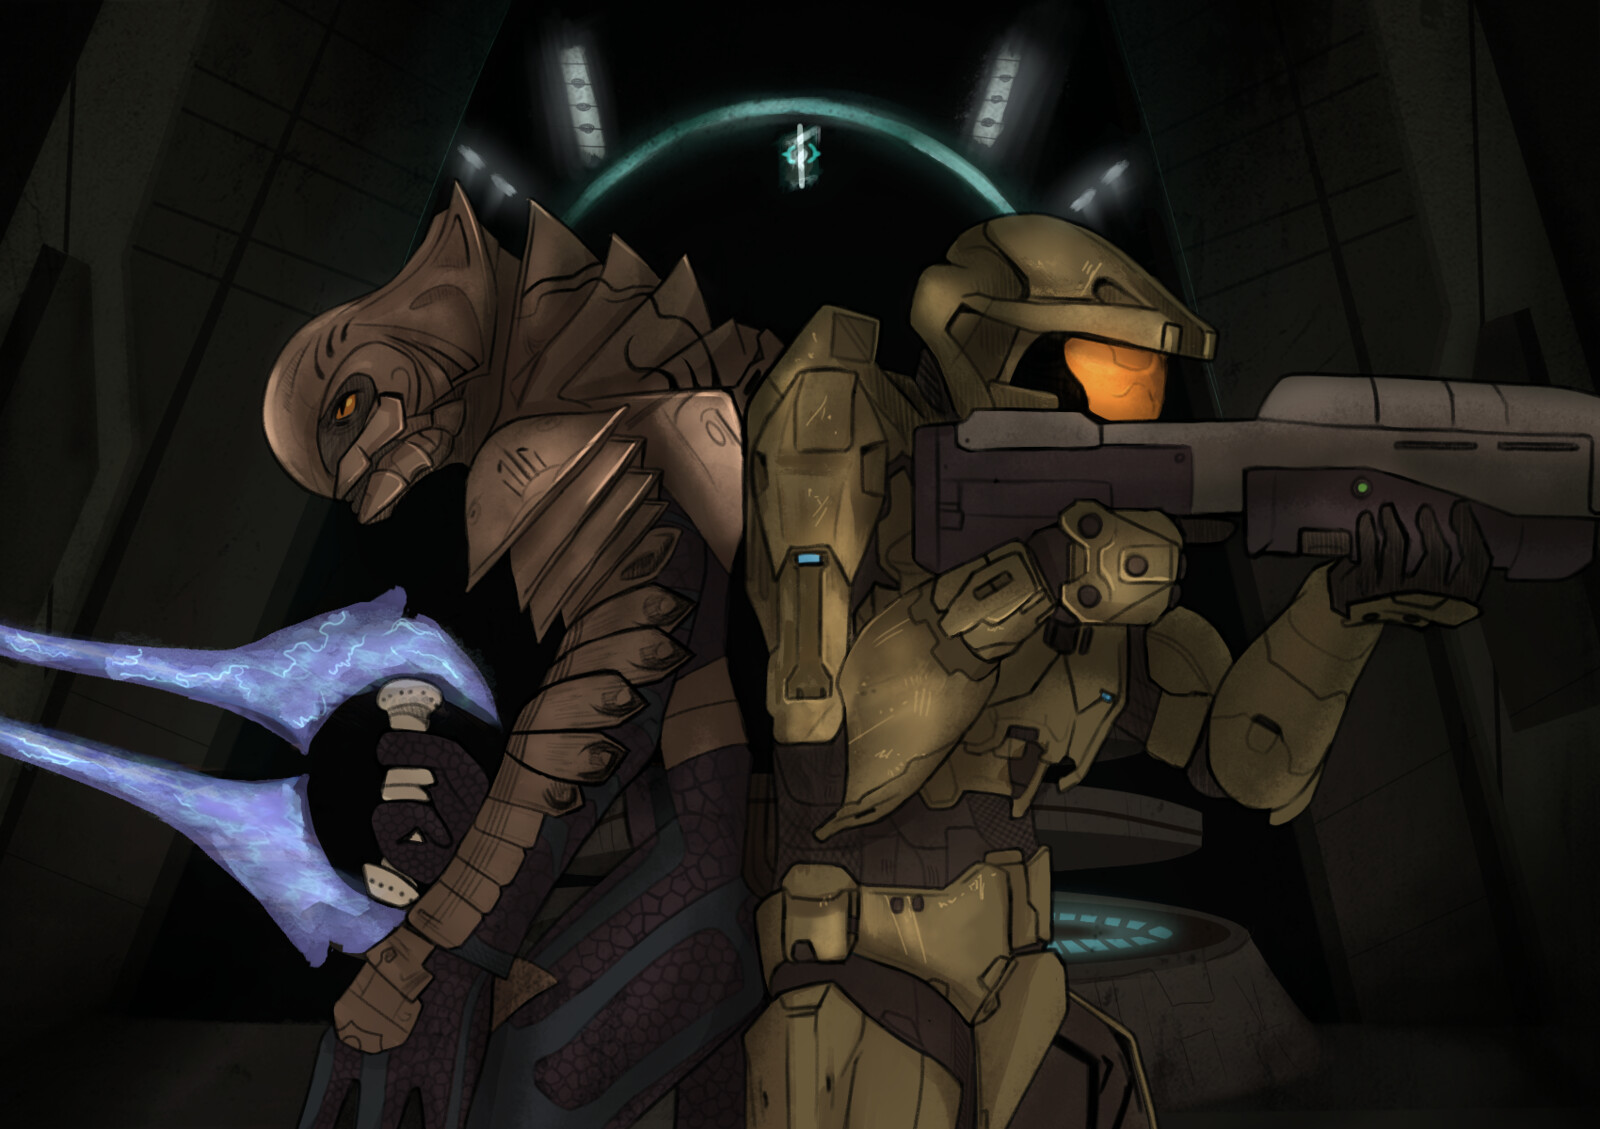 Halo 3 - "We trade one villain for another"